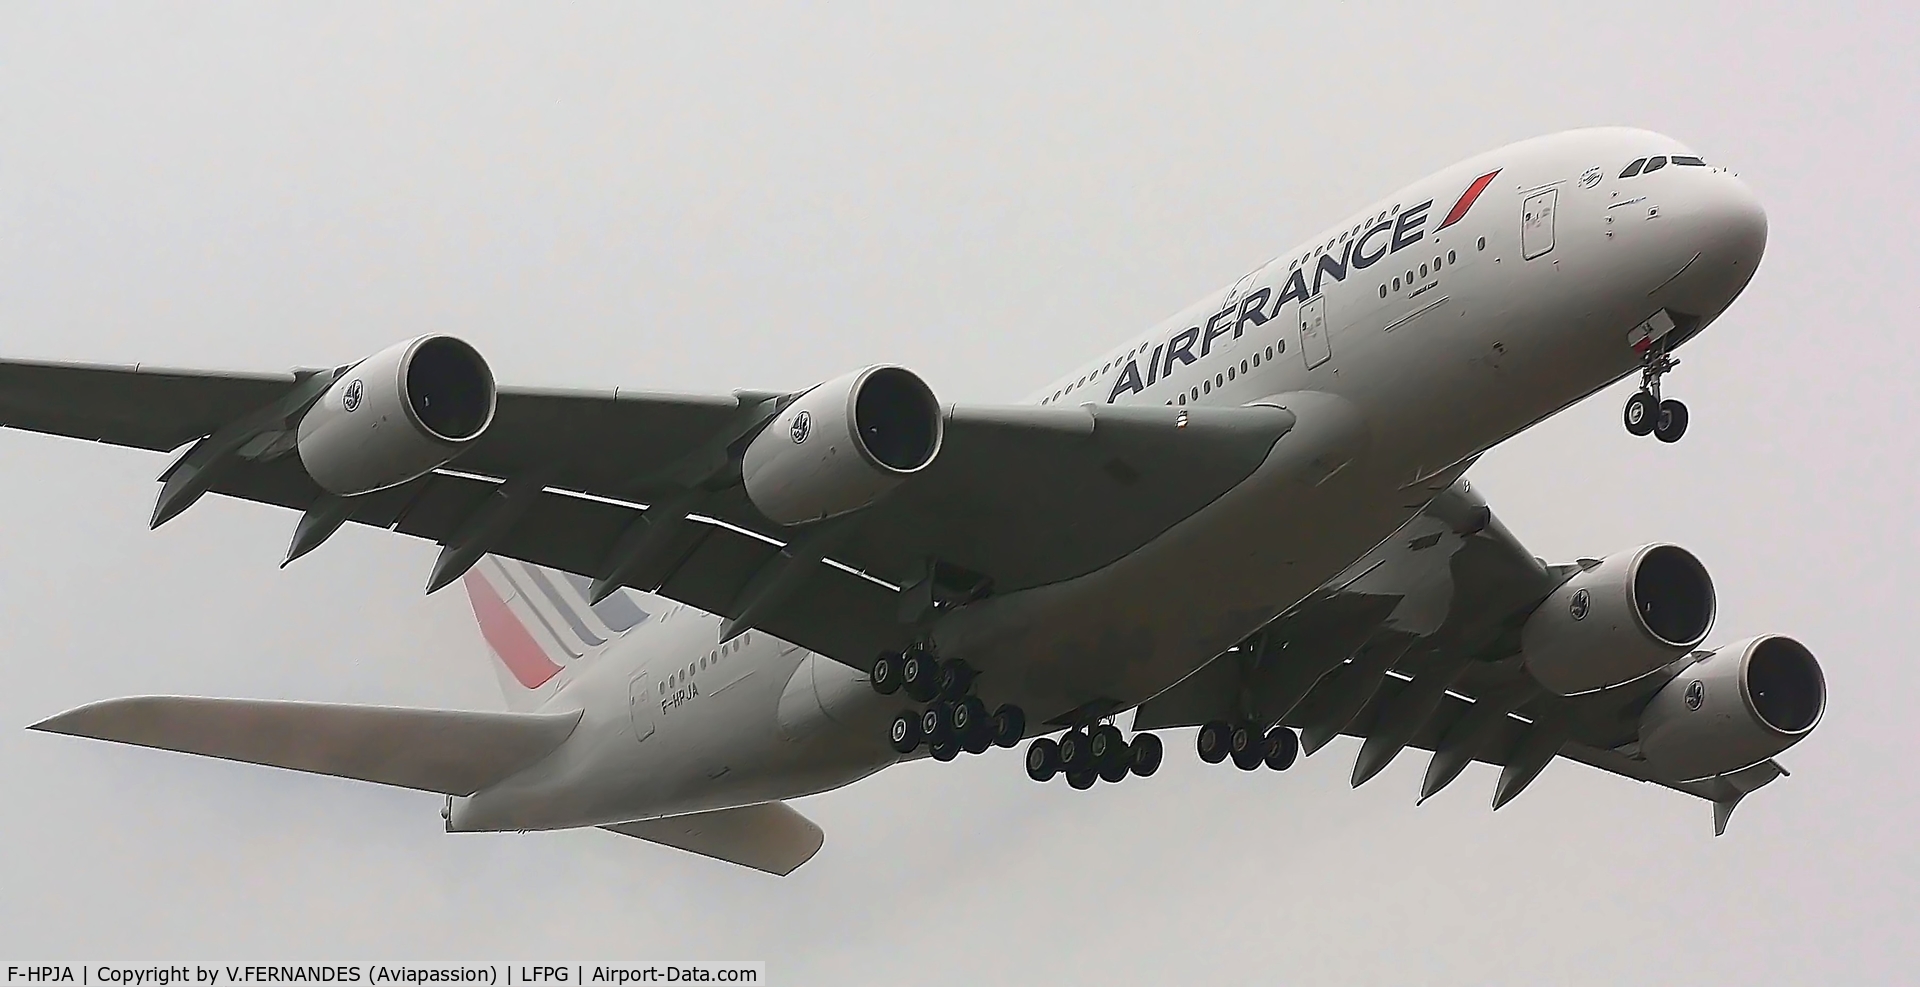 F-HPJA, 2010 Airbus A380-861 C/N 033, 1er time in CDG